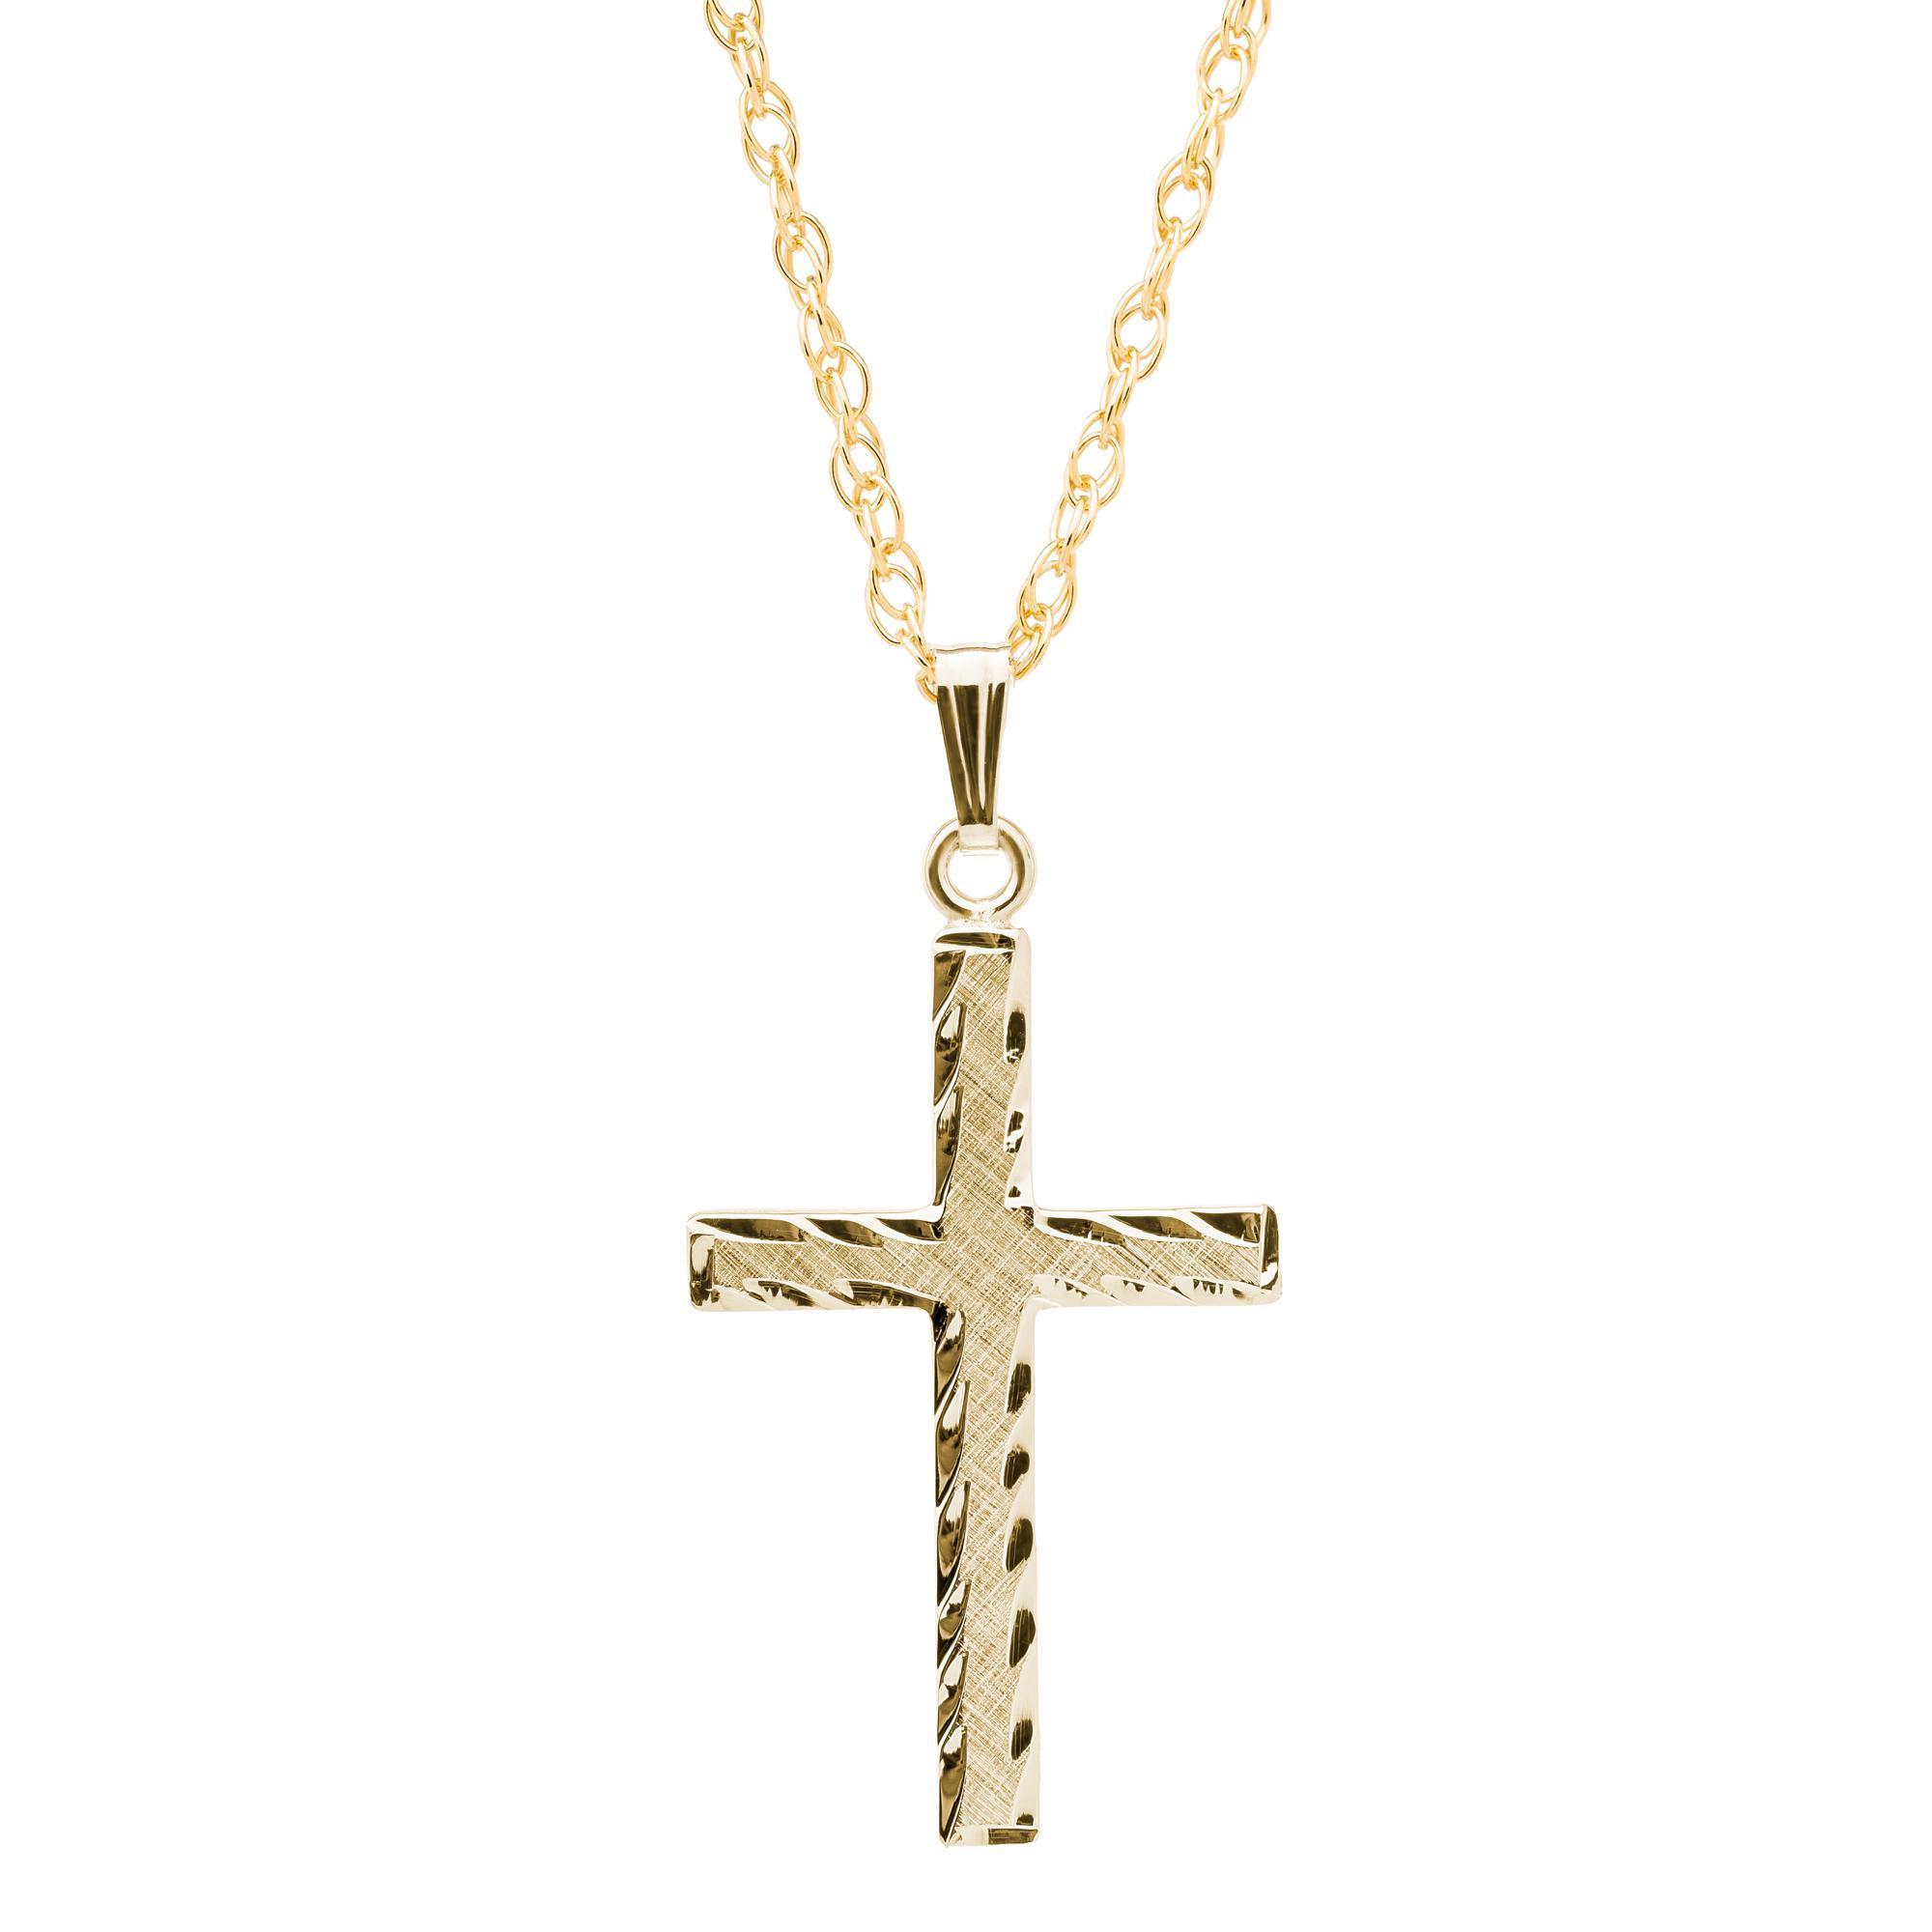 TONYS JEWELRY CO 14kt Gold Filled Cross Pendant